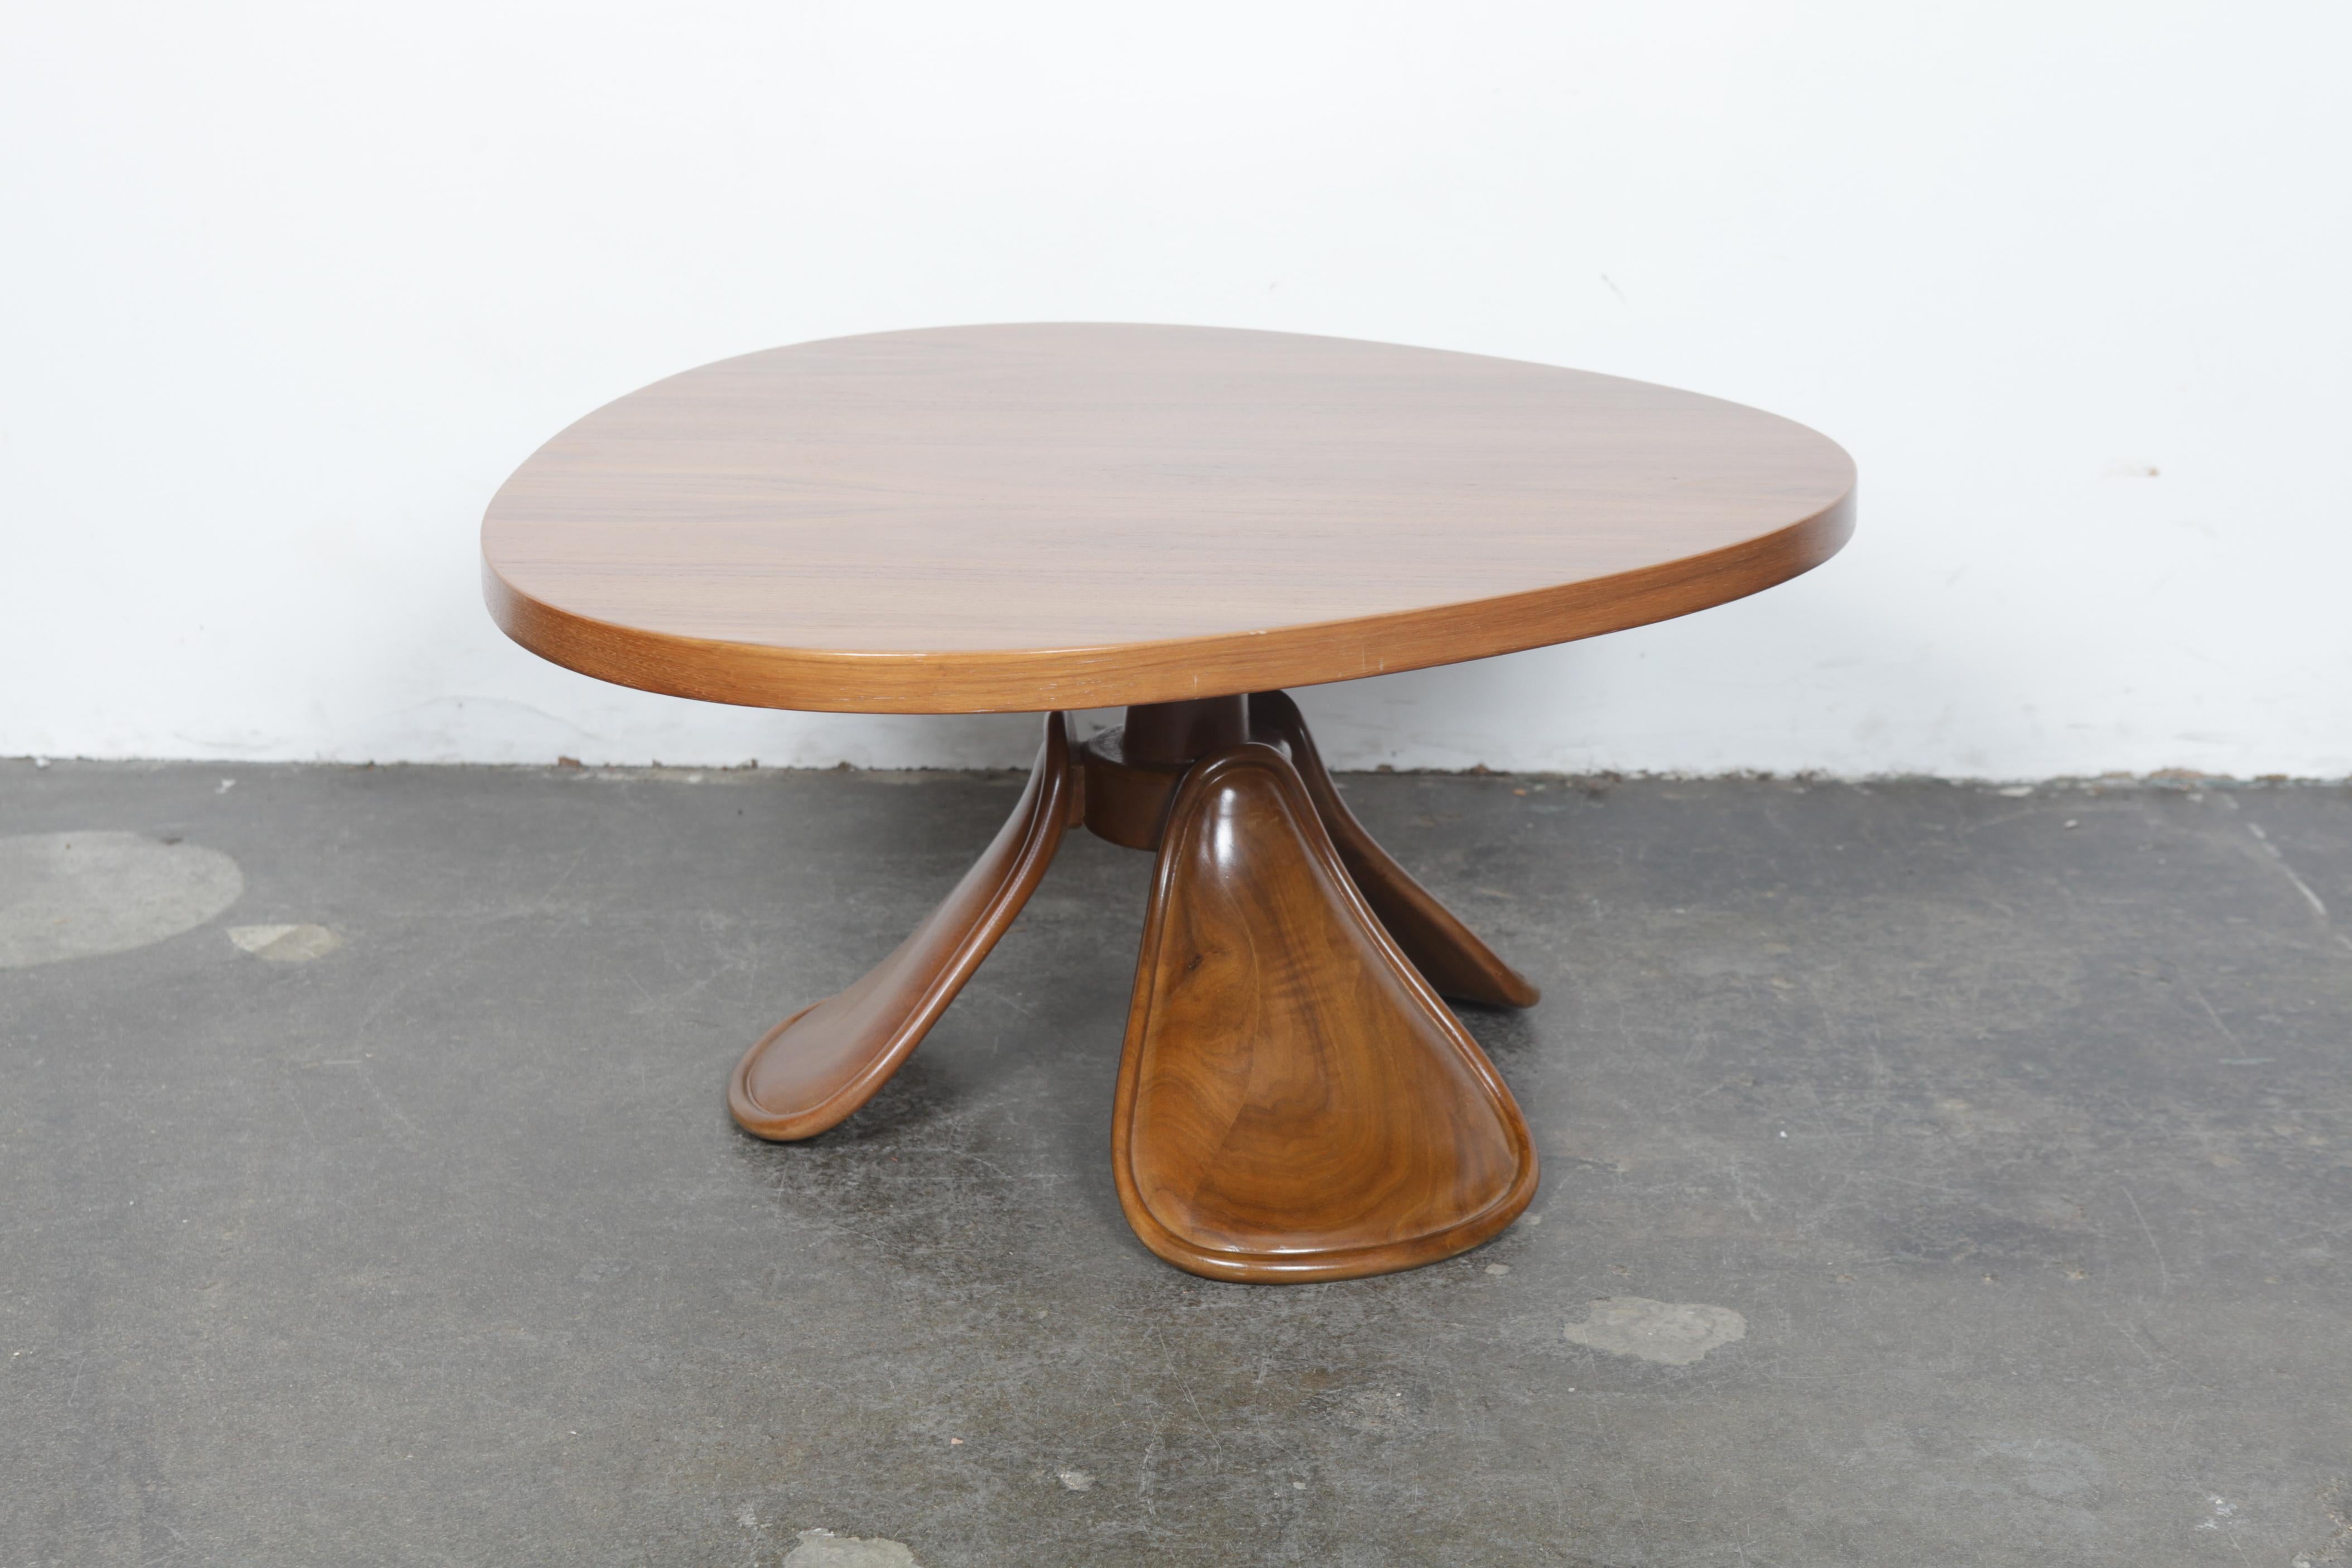 Mid-Century Modern Midcentury Walnut Coffee Table with Organic Rounded Top and Leaf Style Legs